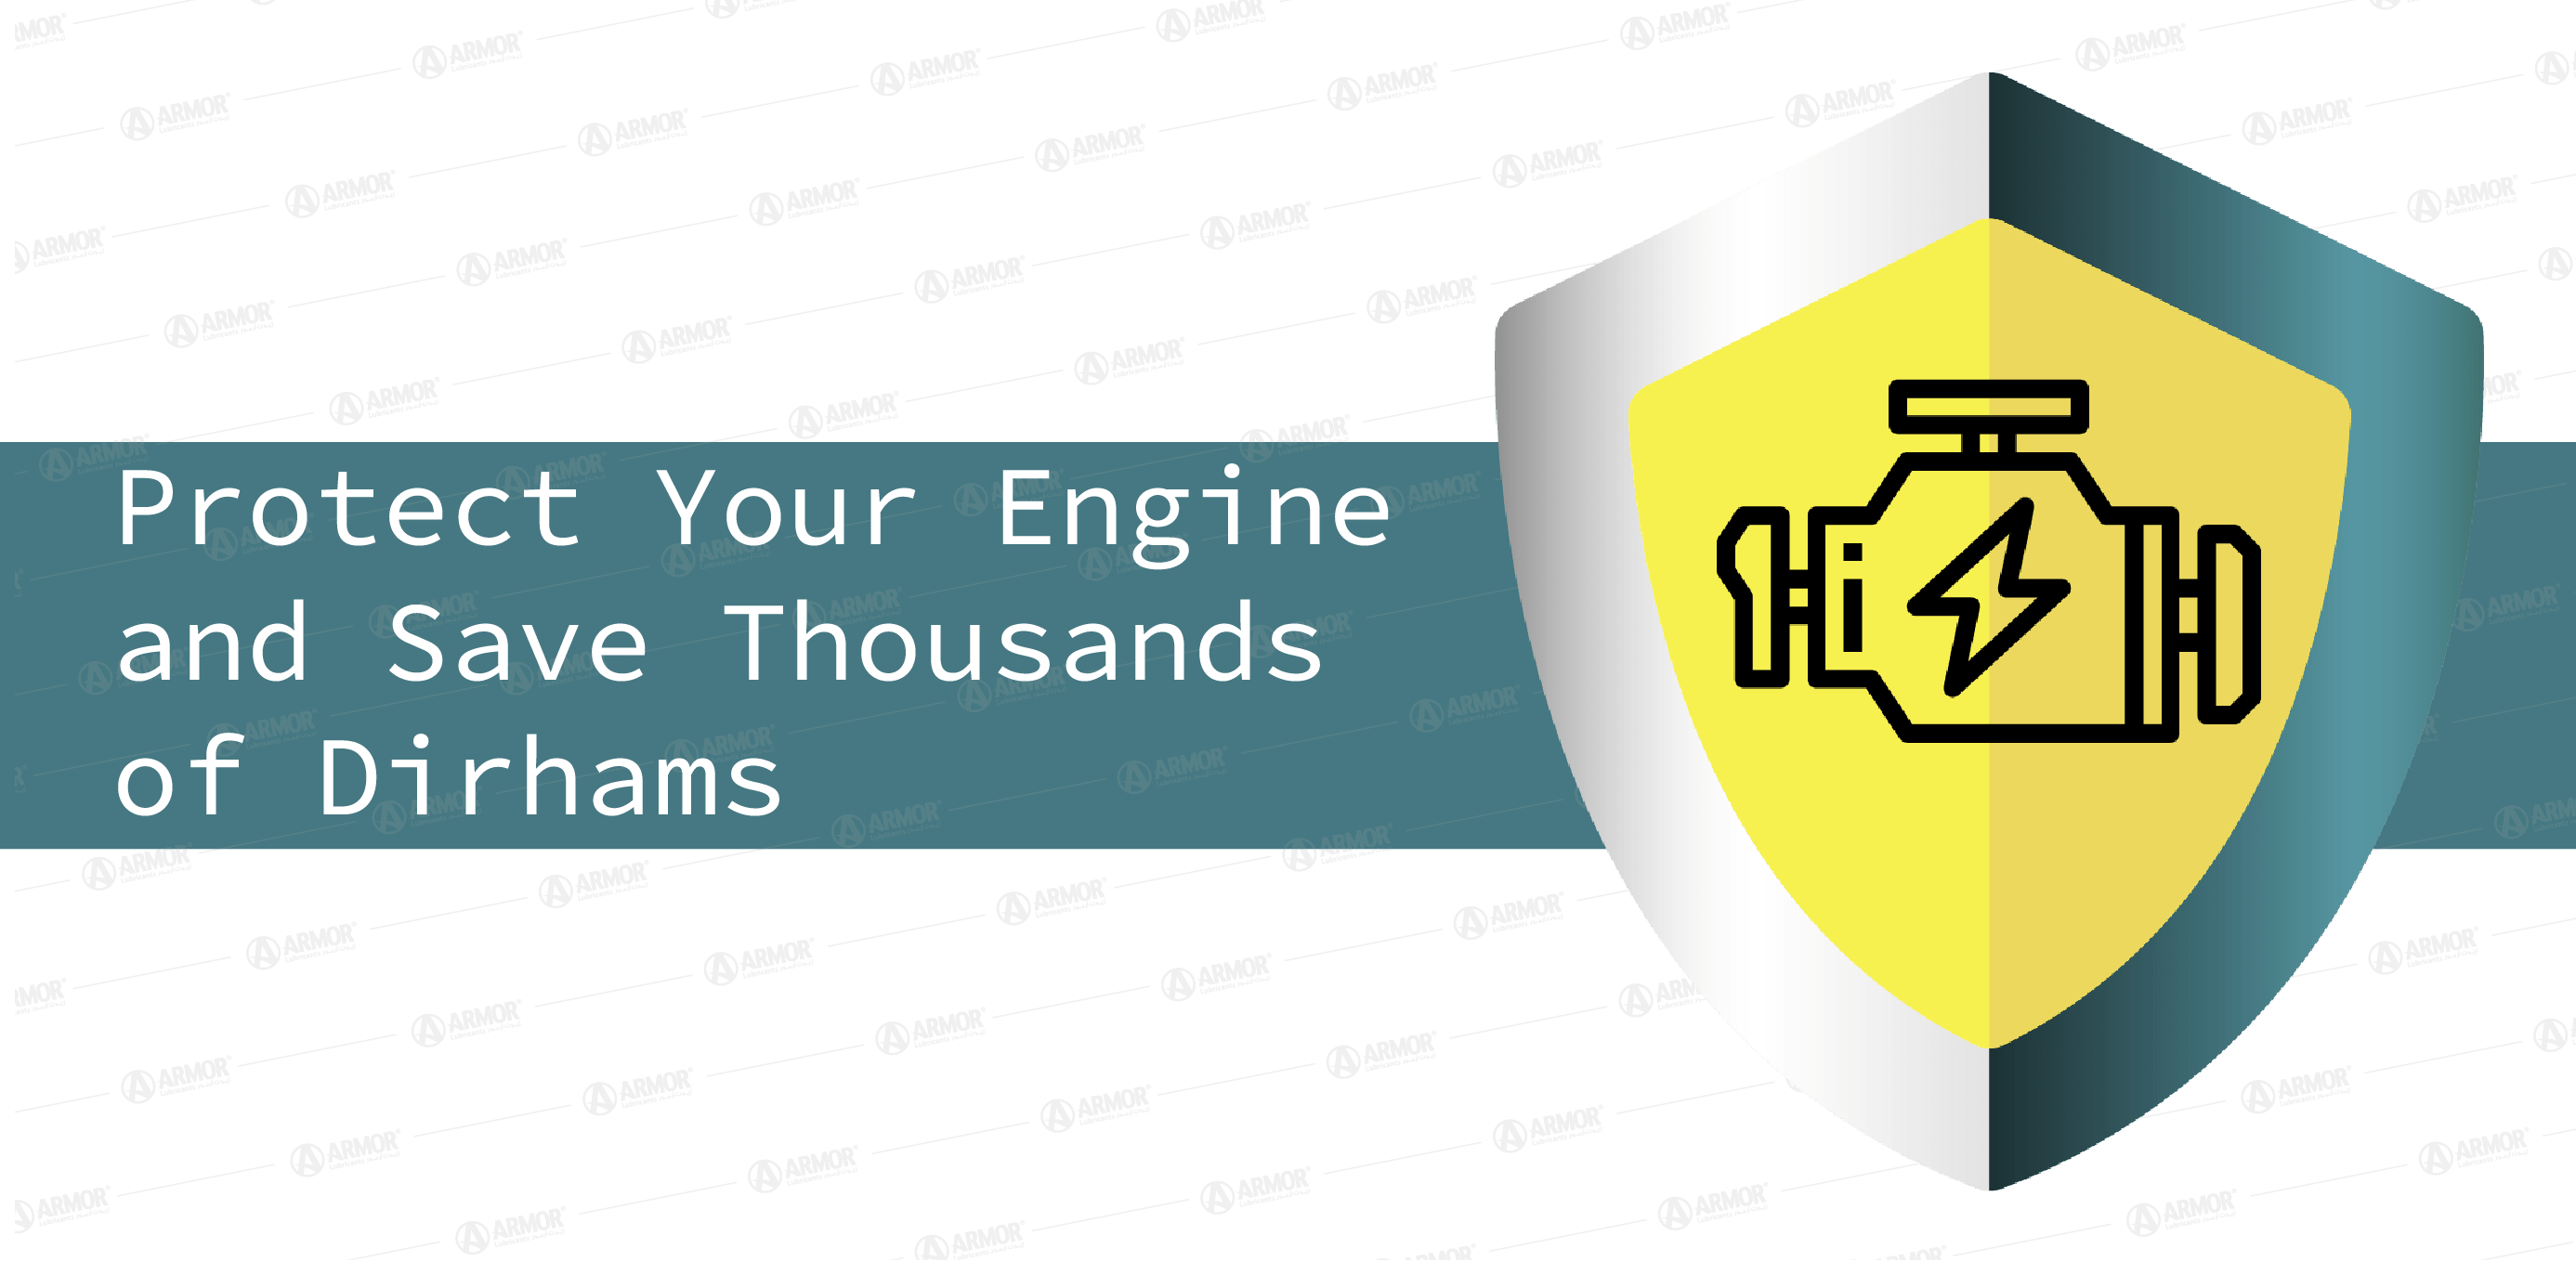 Protect Your Engine and Save 1000’s of Dirhams: How the Right Engine Oil Prevents Engine Damage